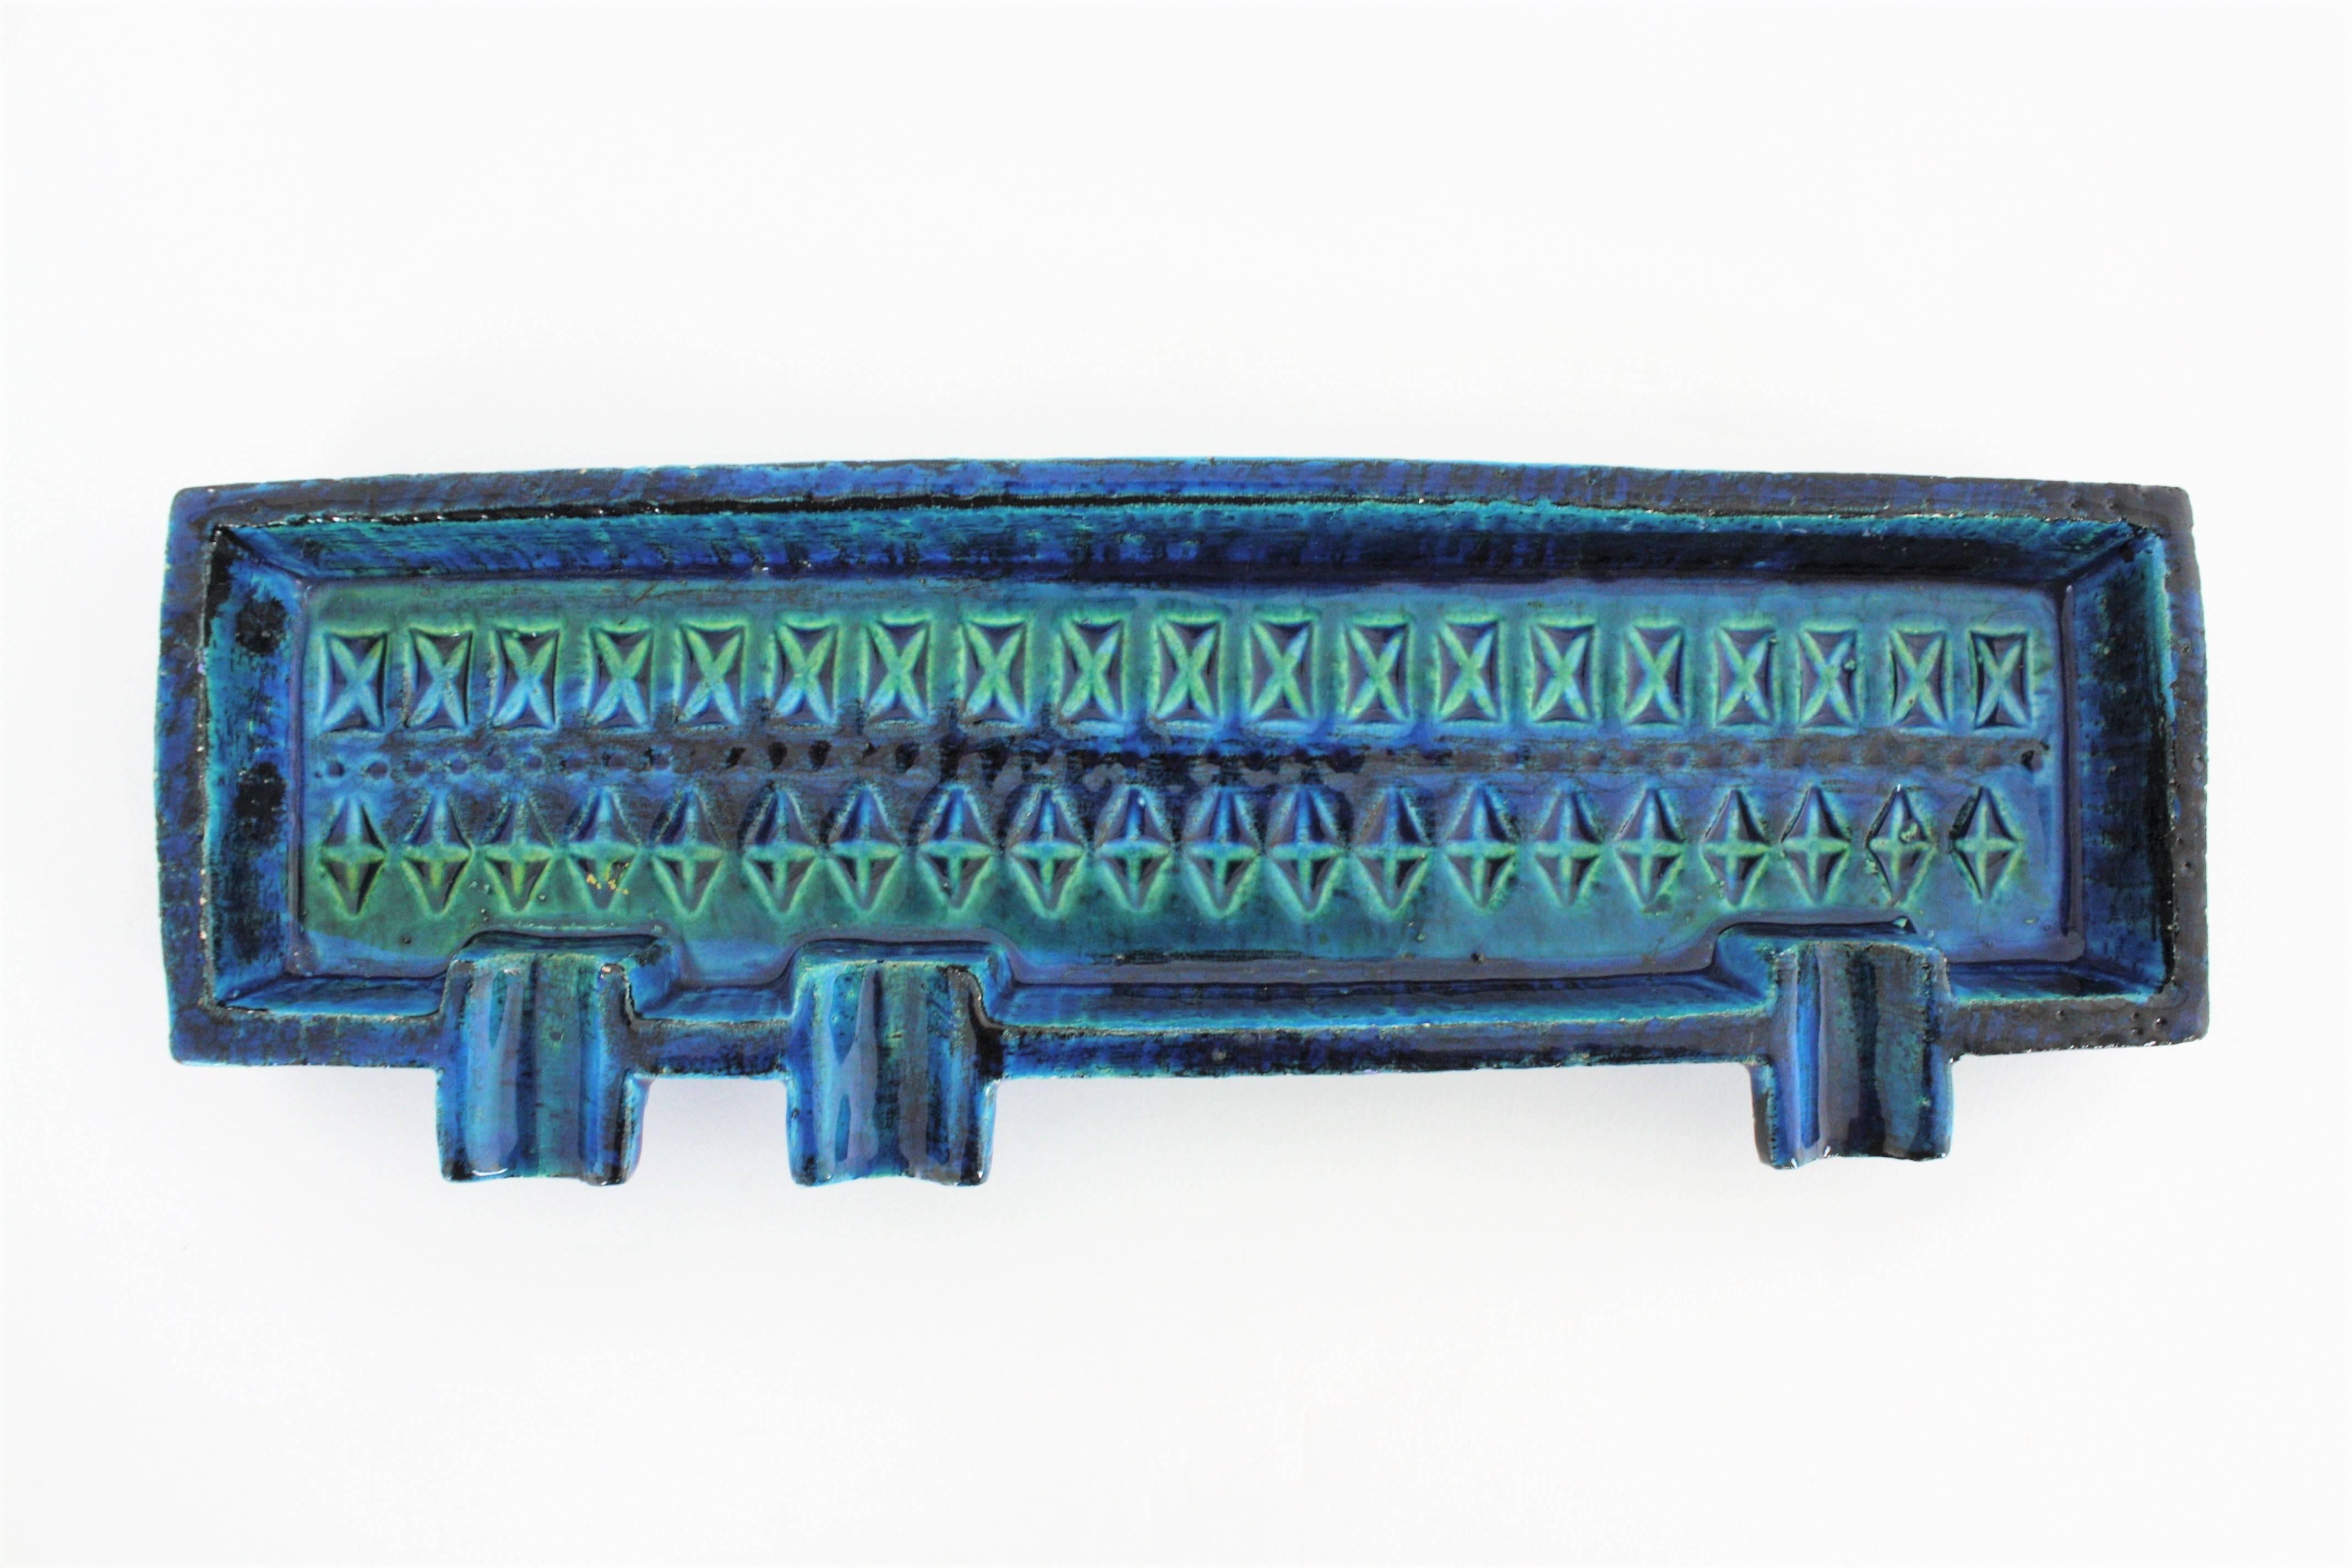 Italian handcrafted blue glazed ceramic rectangular ahstray with hand-carved geometric designs in cobalt blue and turquoise colors. Rimini blue collection designed by Aldo Londi for Bitossi, Italy, 1960s.
Lovely to use as ashtray but also as a